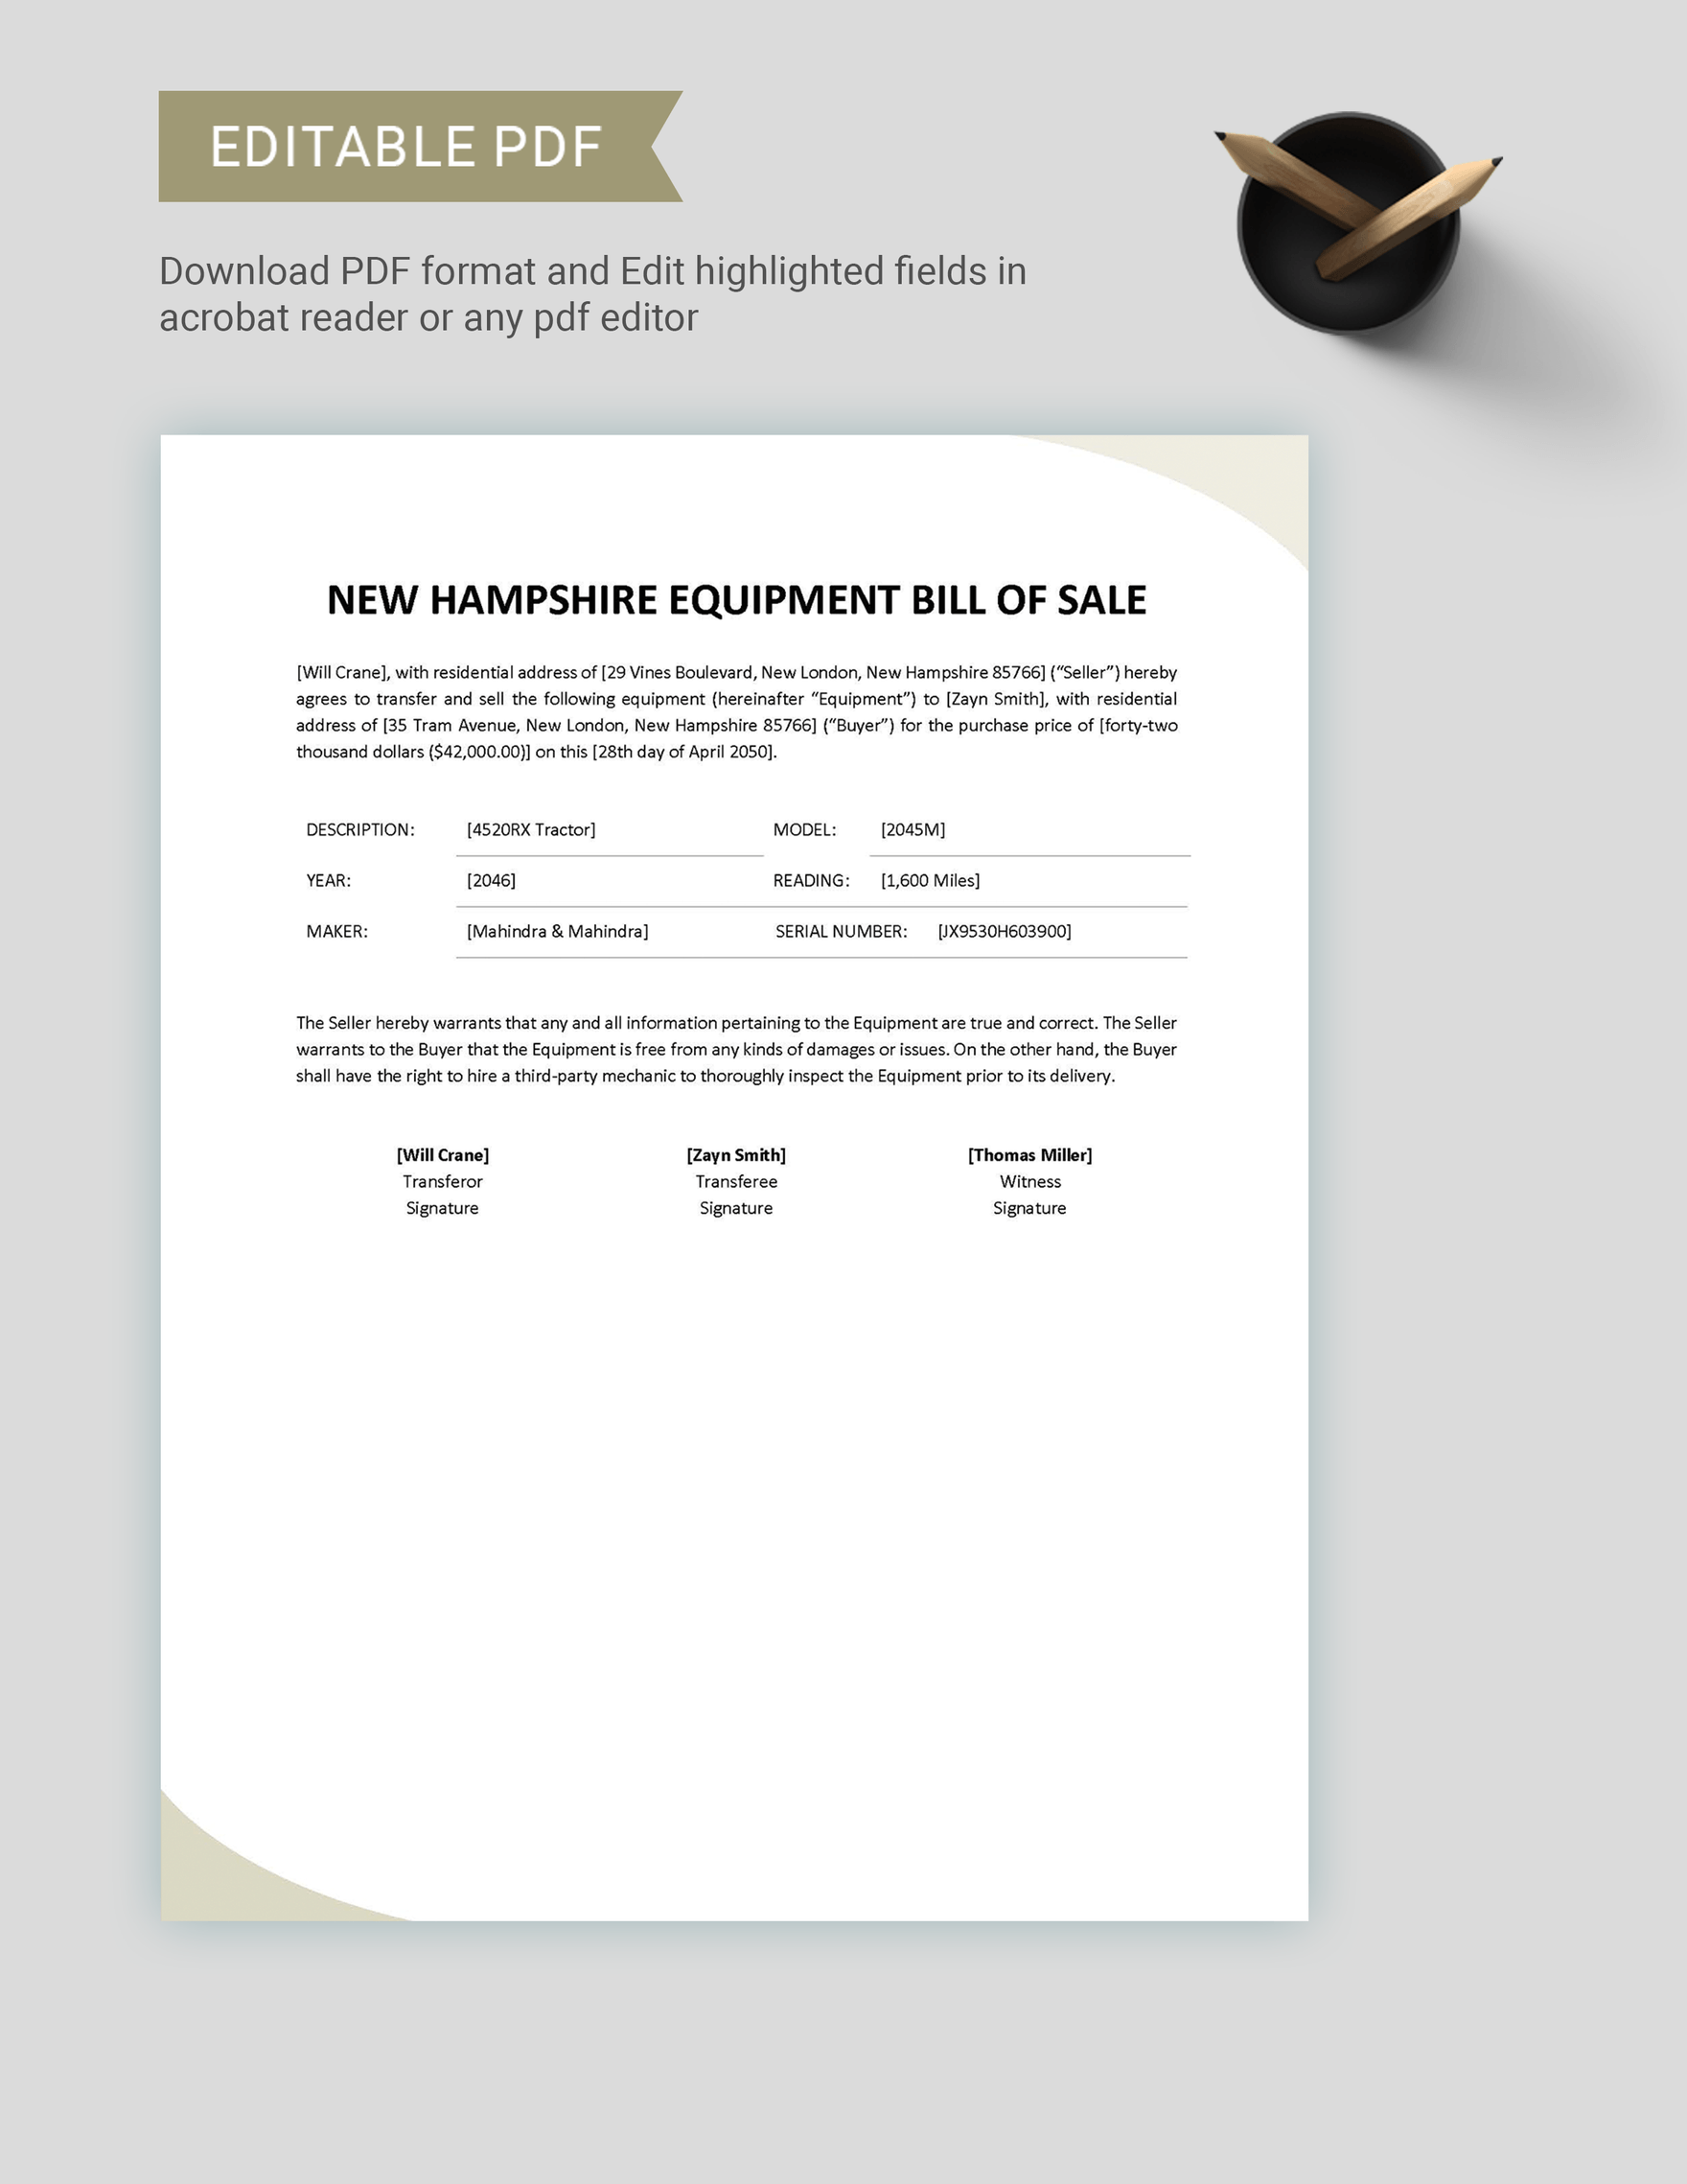 New Hampshire Equipment Bill of Sale Template